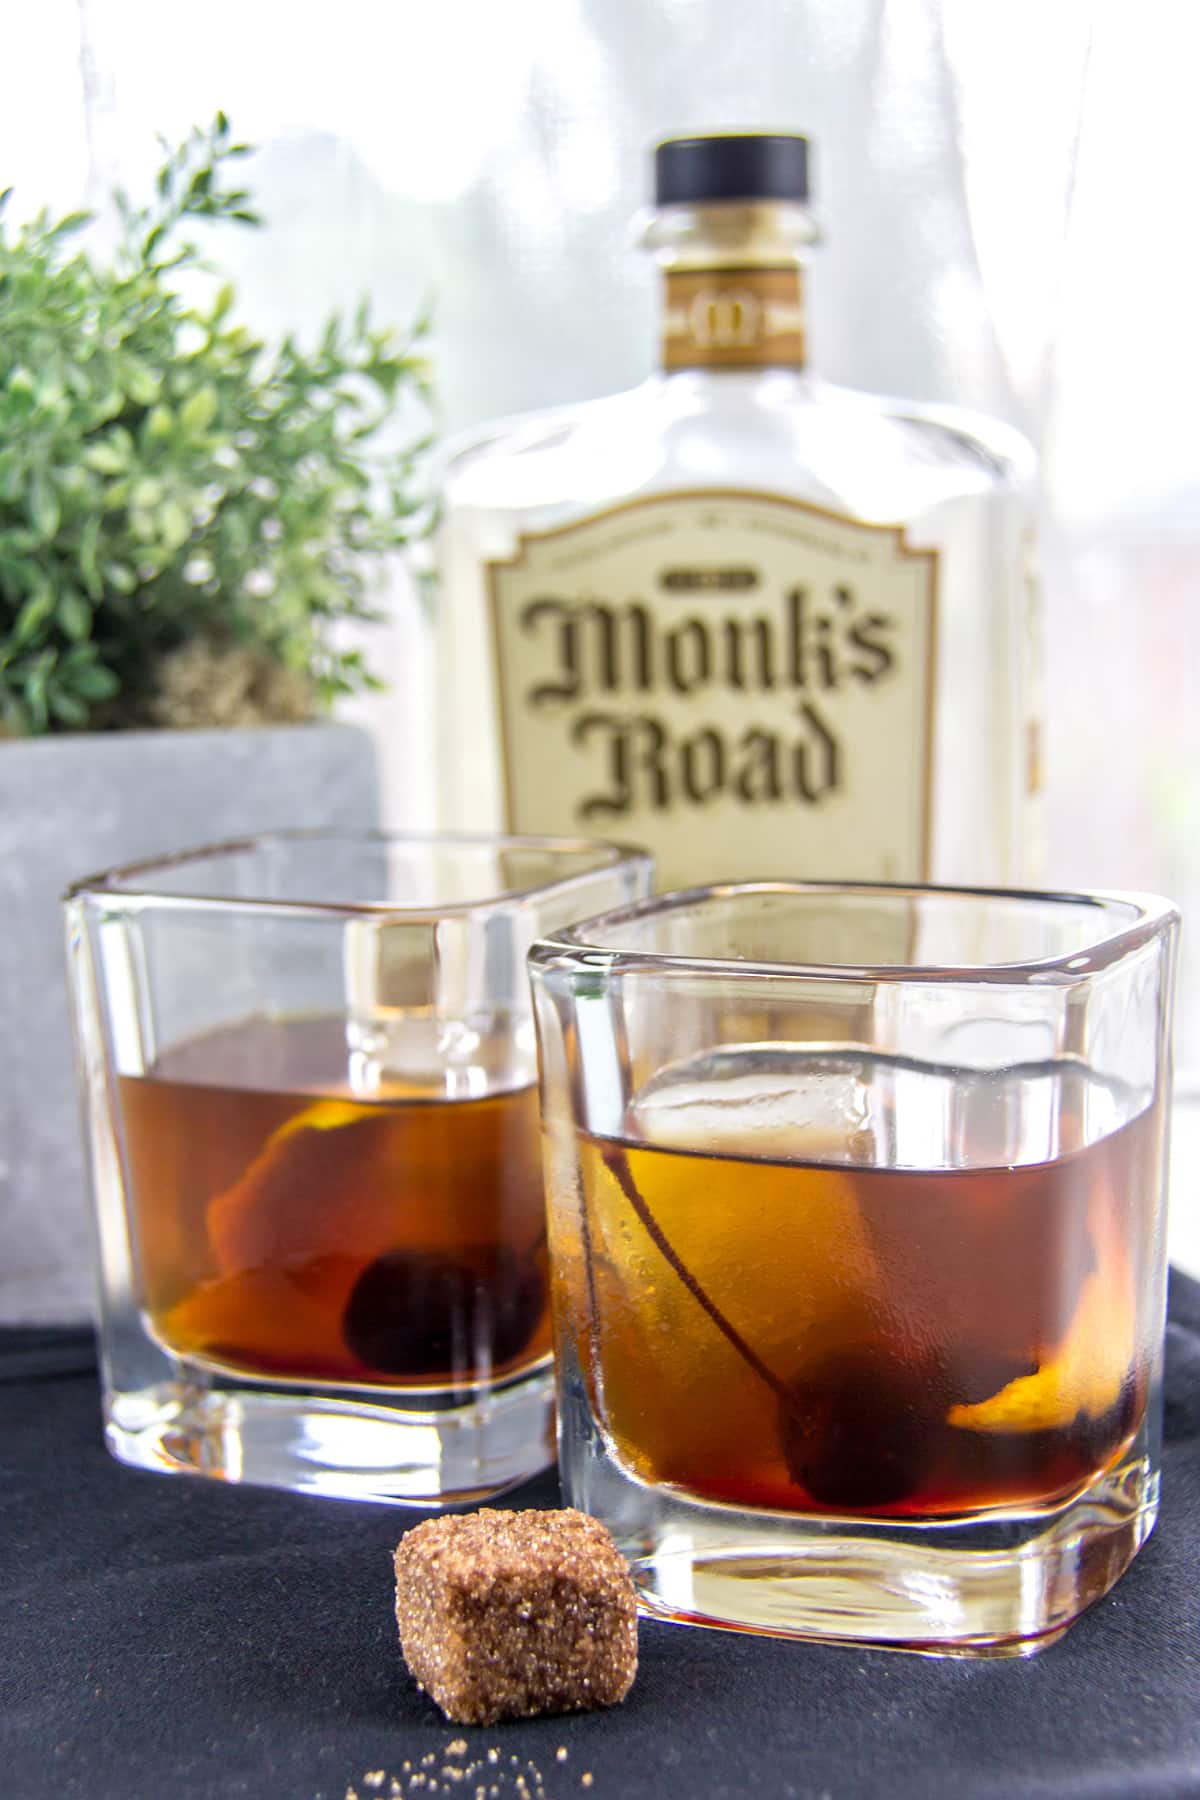 an old fashioned made with Monks Road single batch and Your Grandpas old fashioned cubes